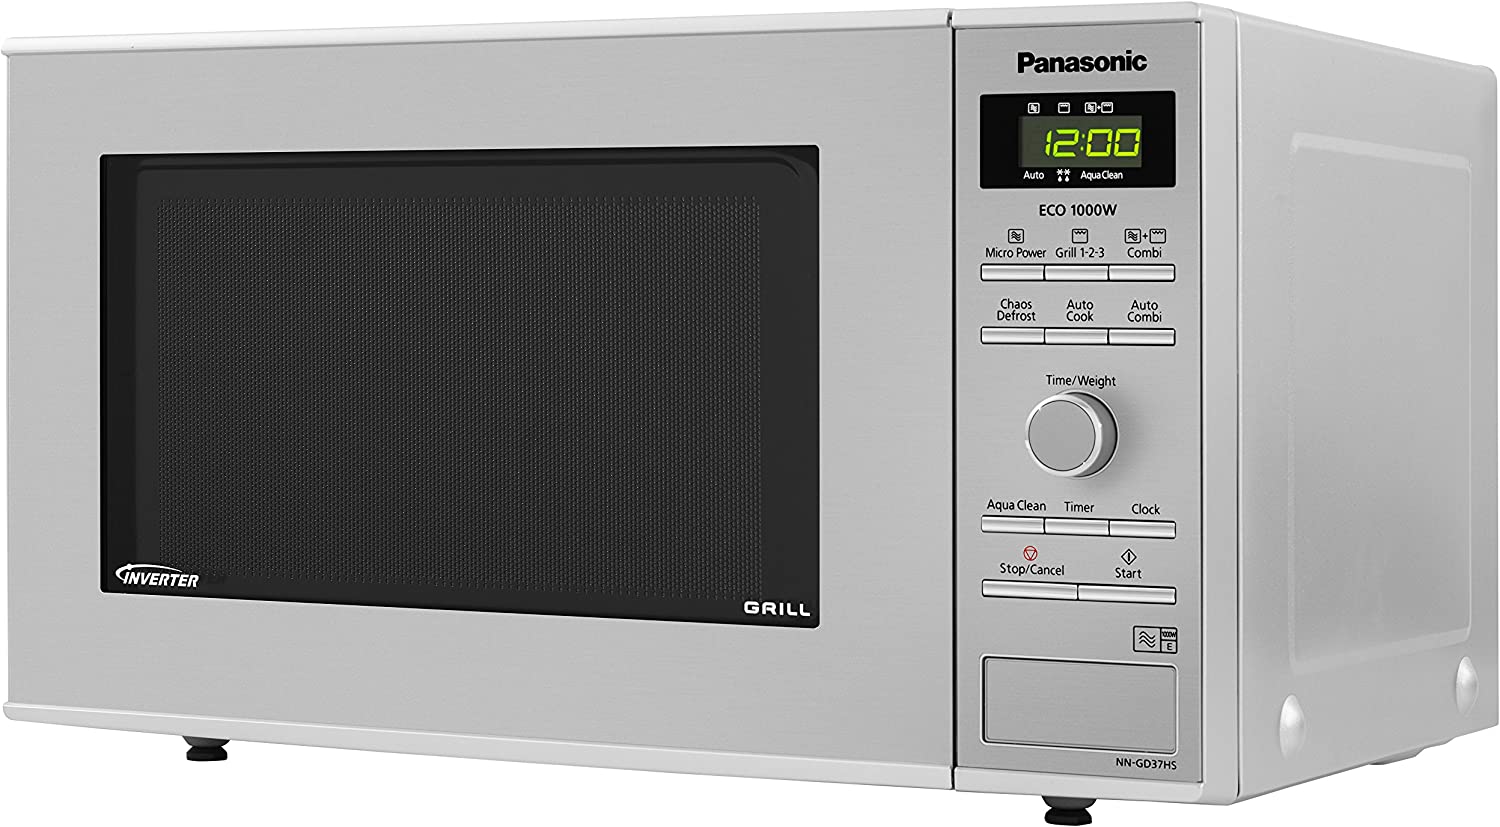 Panasonic 23 Litre 1000W Grill Microwave in Silver, NN-GD37HSBPQ